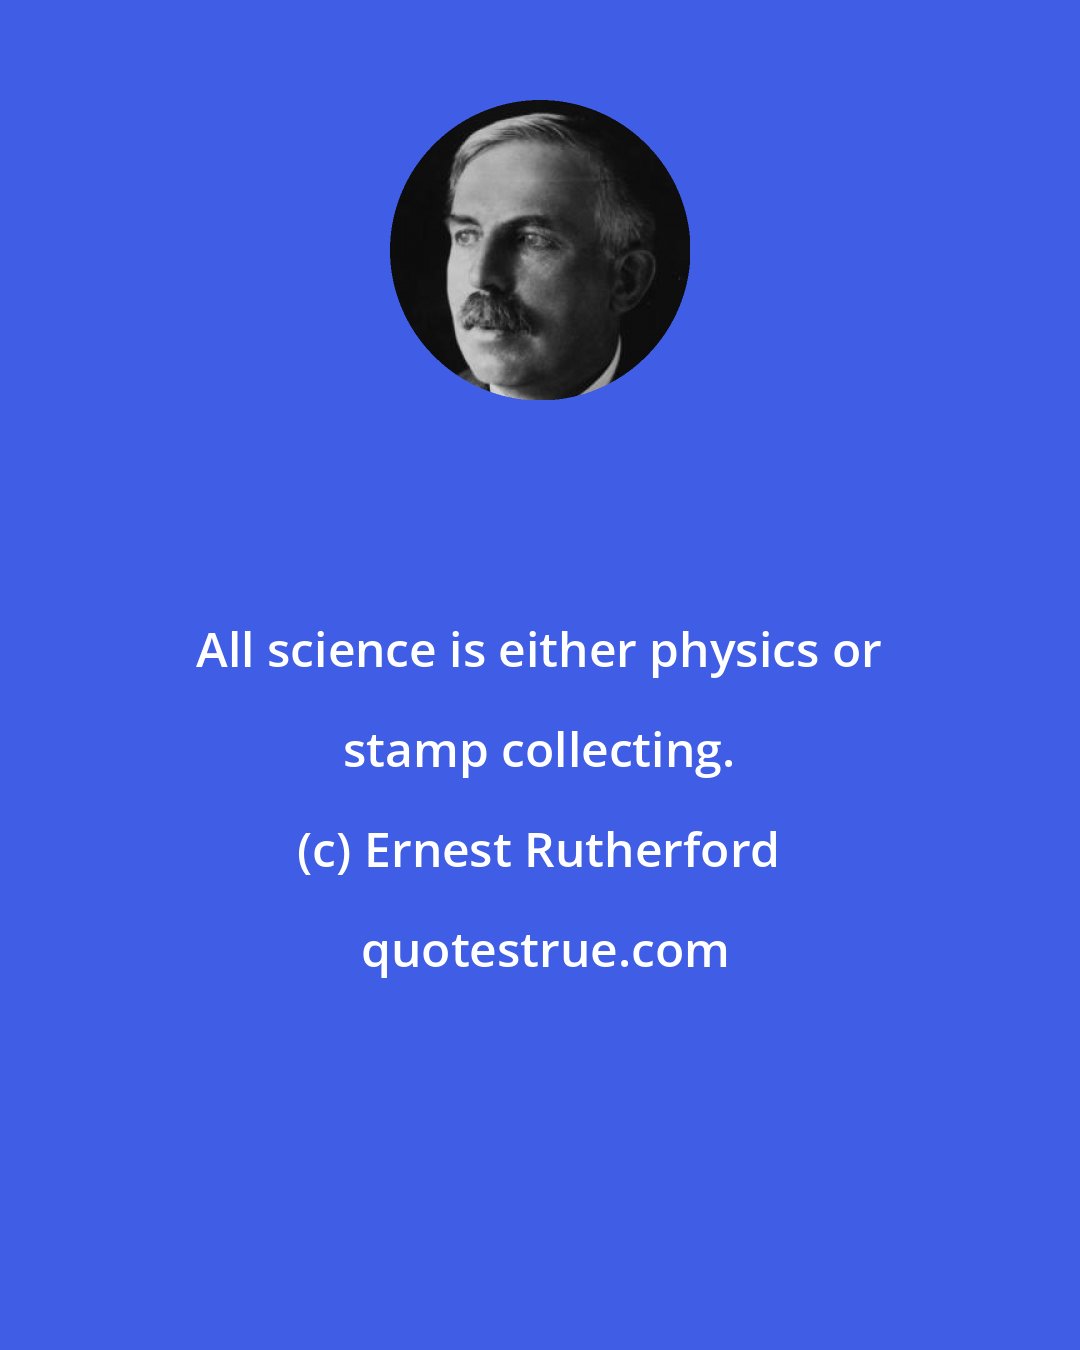 Ernest Rutherford: All science is either physics or stamp collecting.